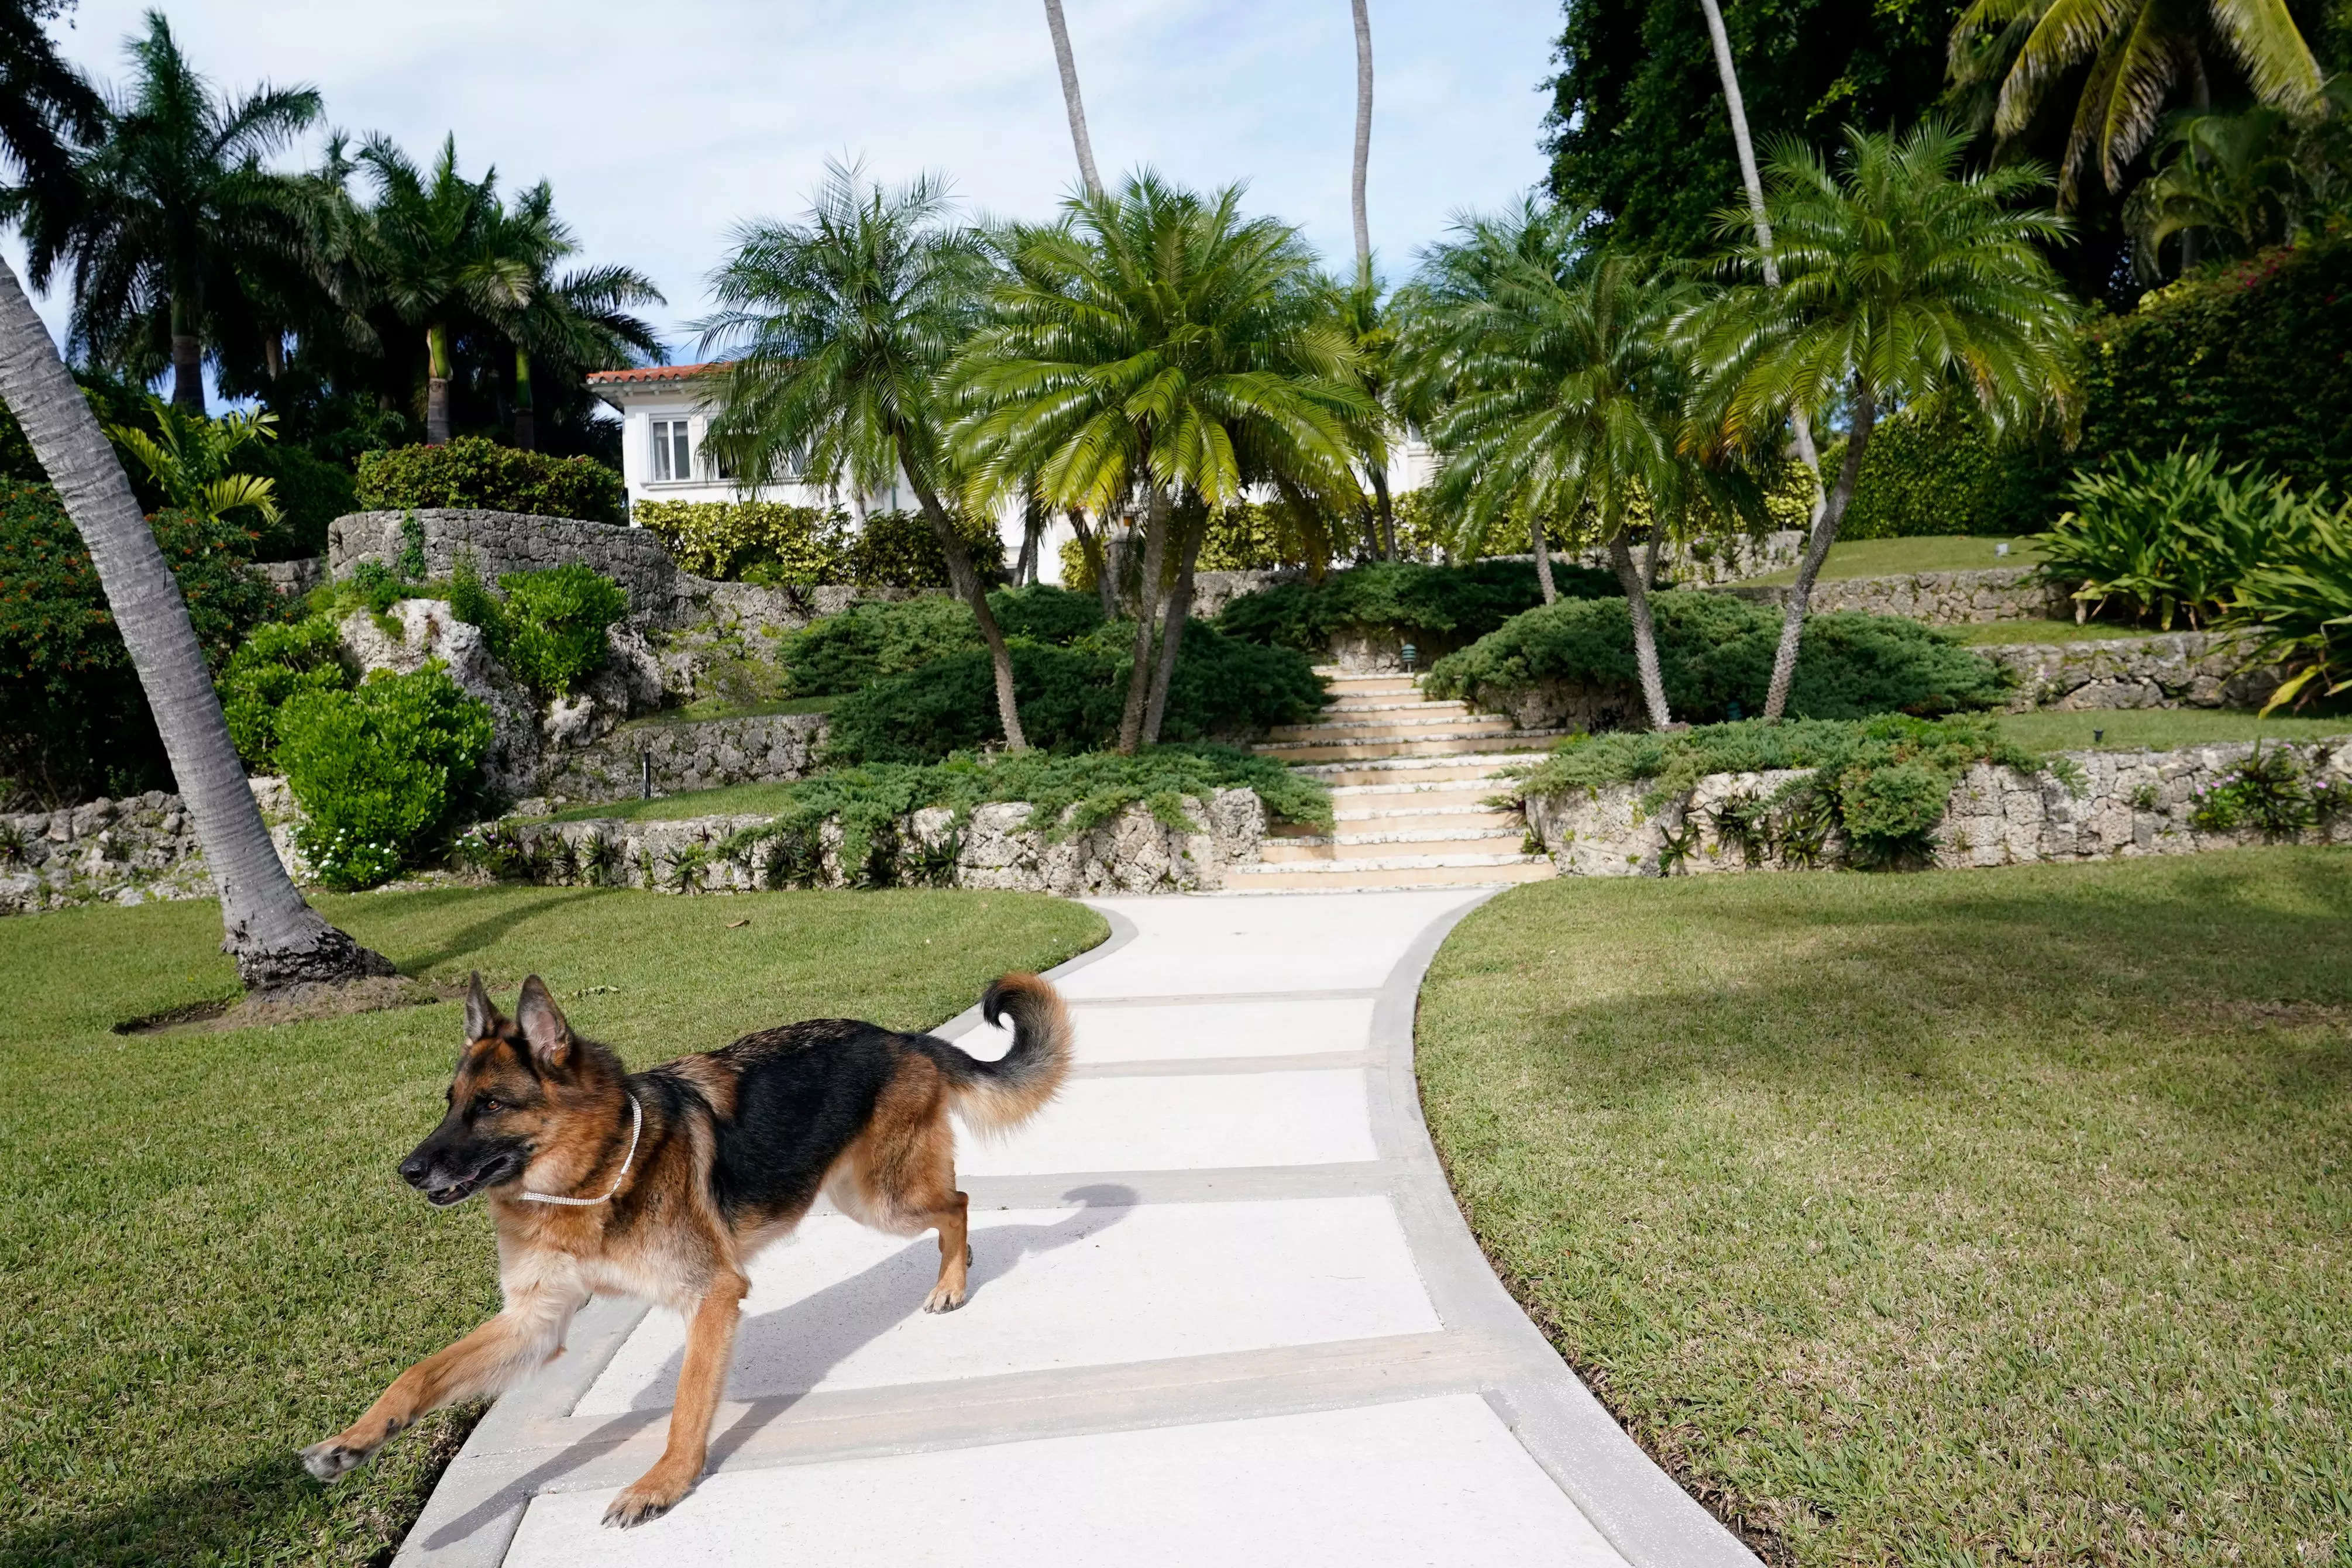 A millionaire German shepherd is selling a 9-bedroom Miami mansion previously owned by Madonna, with an asking price of more than $30 million | Business Insider India